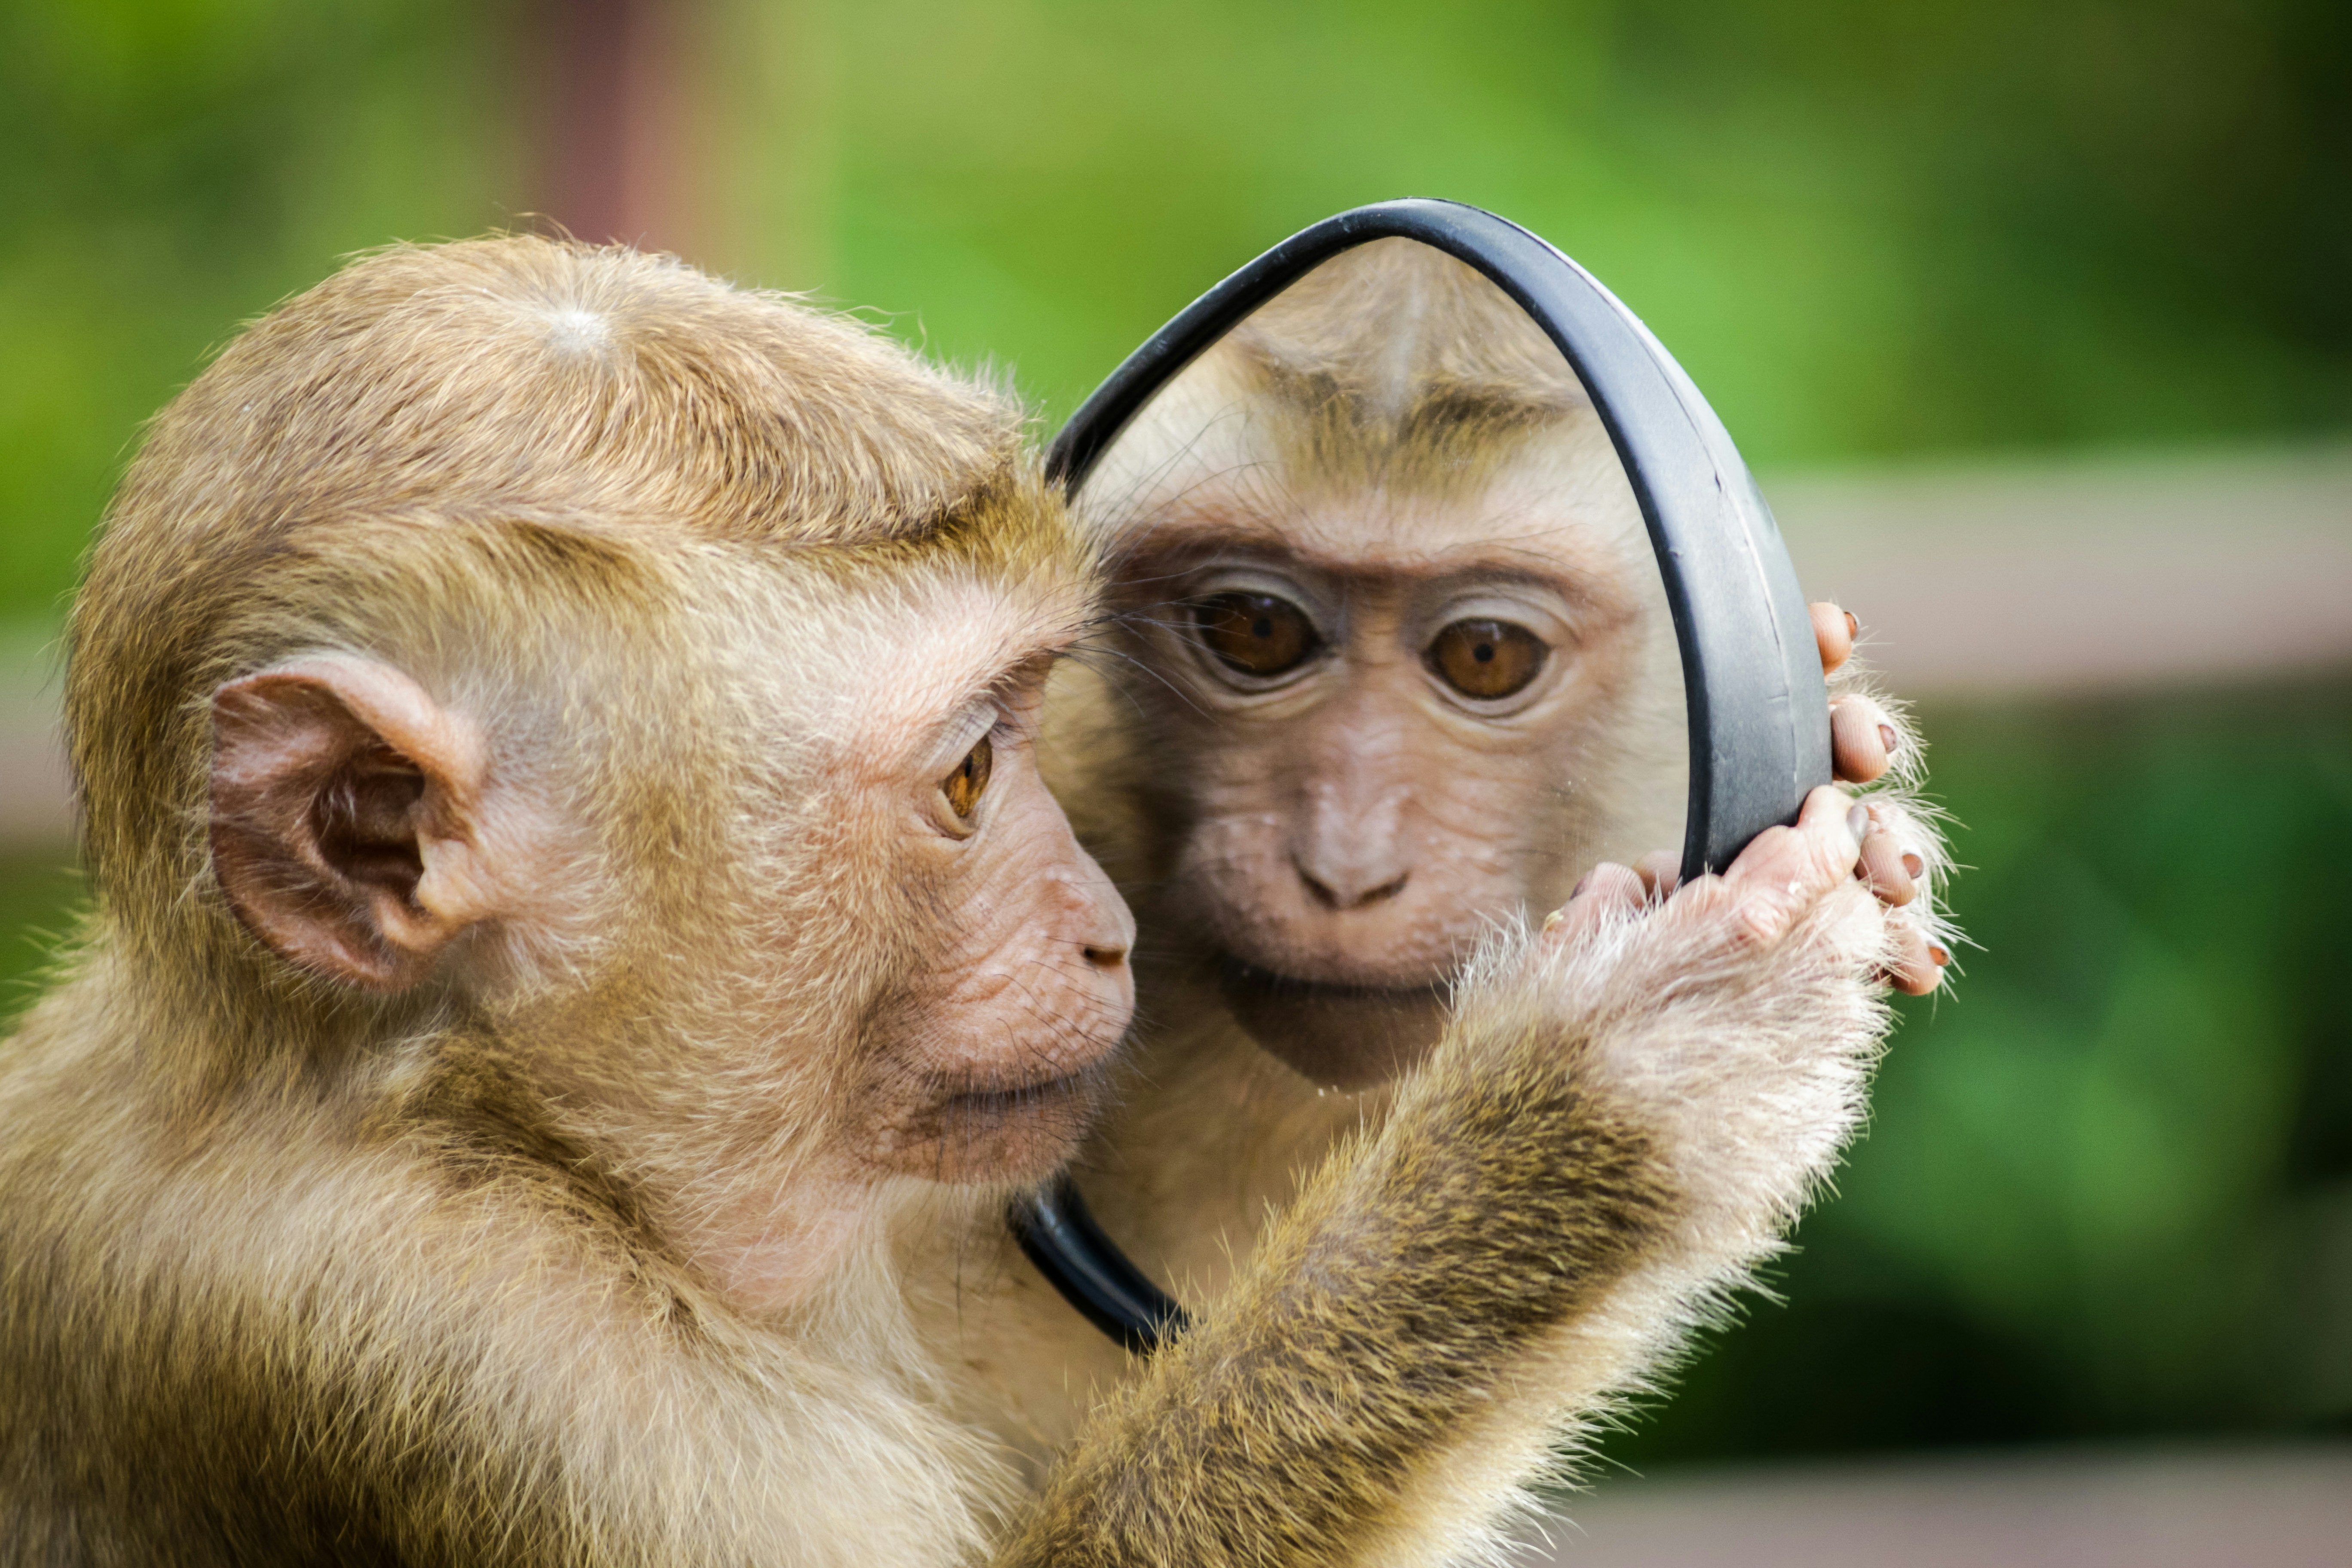 The monkey was absolutely mesmerized by his own image in the mirror. I took a few different photos of this monkey playing with the mirror on my scooter at a location called Monkey Hill in Thailand. The monkey was so gentle and was really happy to stare at his own image. I wonder if the monkey knew it was his own reflection or if he thought it was another monkey.